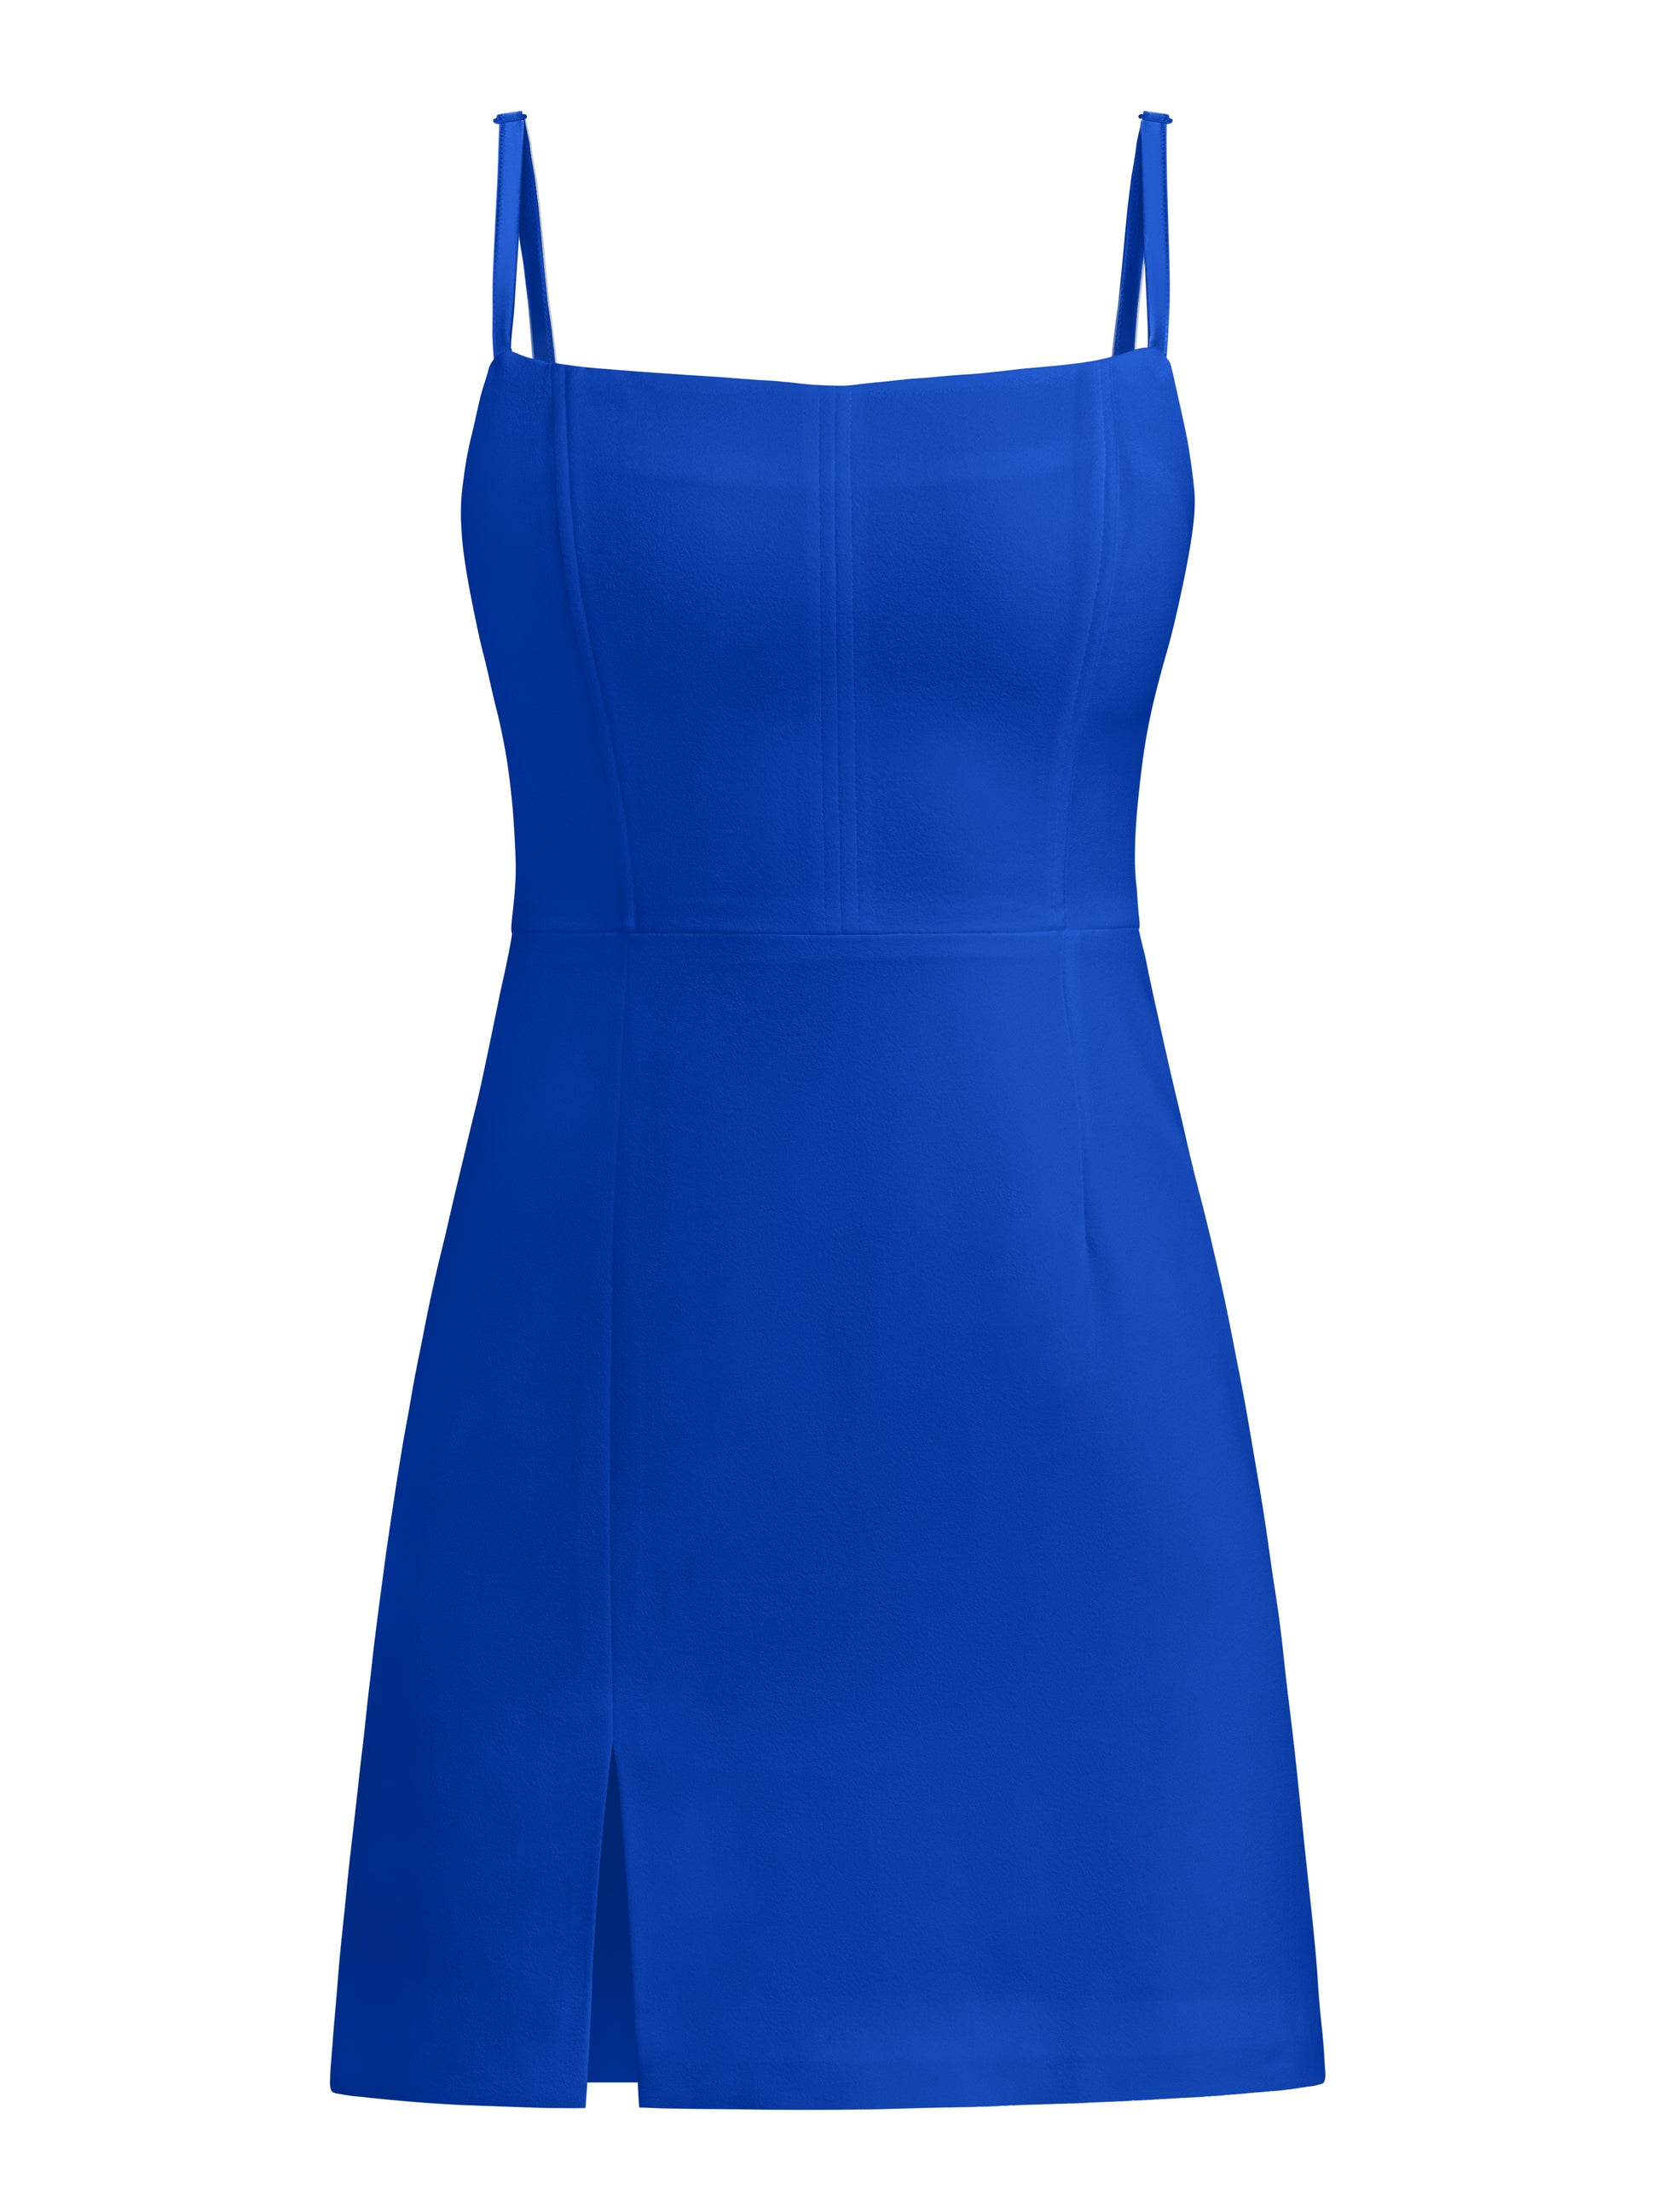 Into You Fitted Mini Dress - Azure Blue by Tia Dorraine Women's Luxury Fashion Designer Clothing Brand